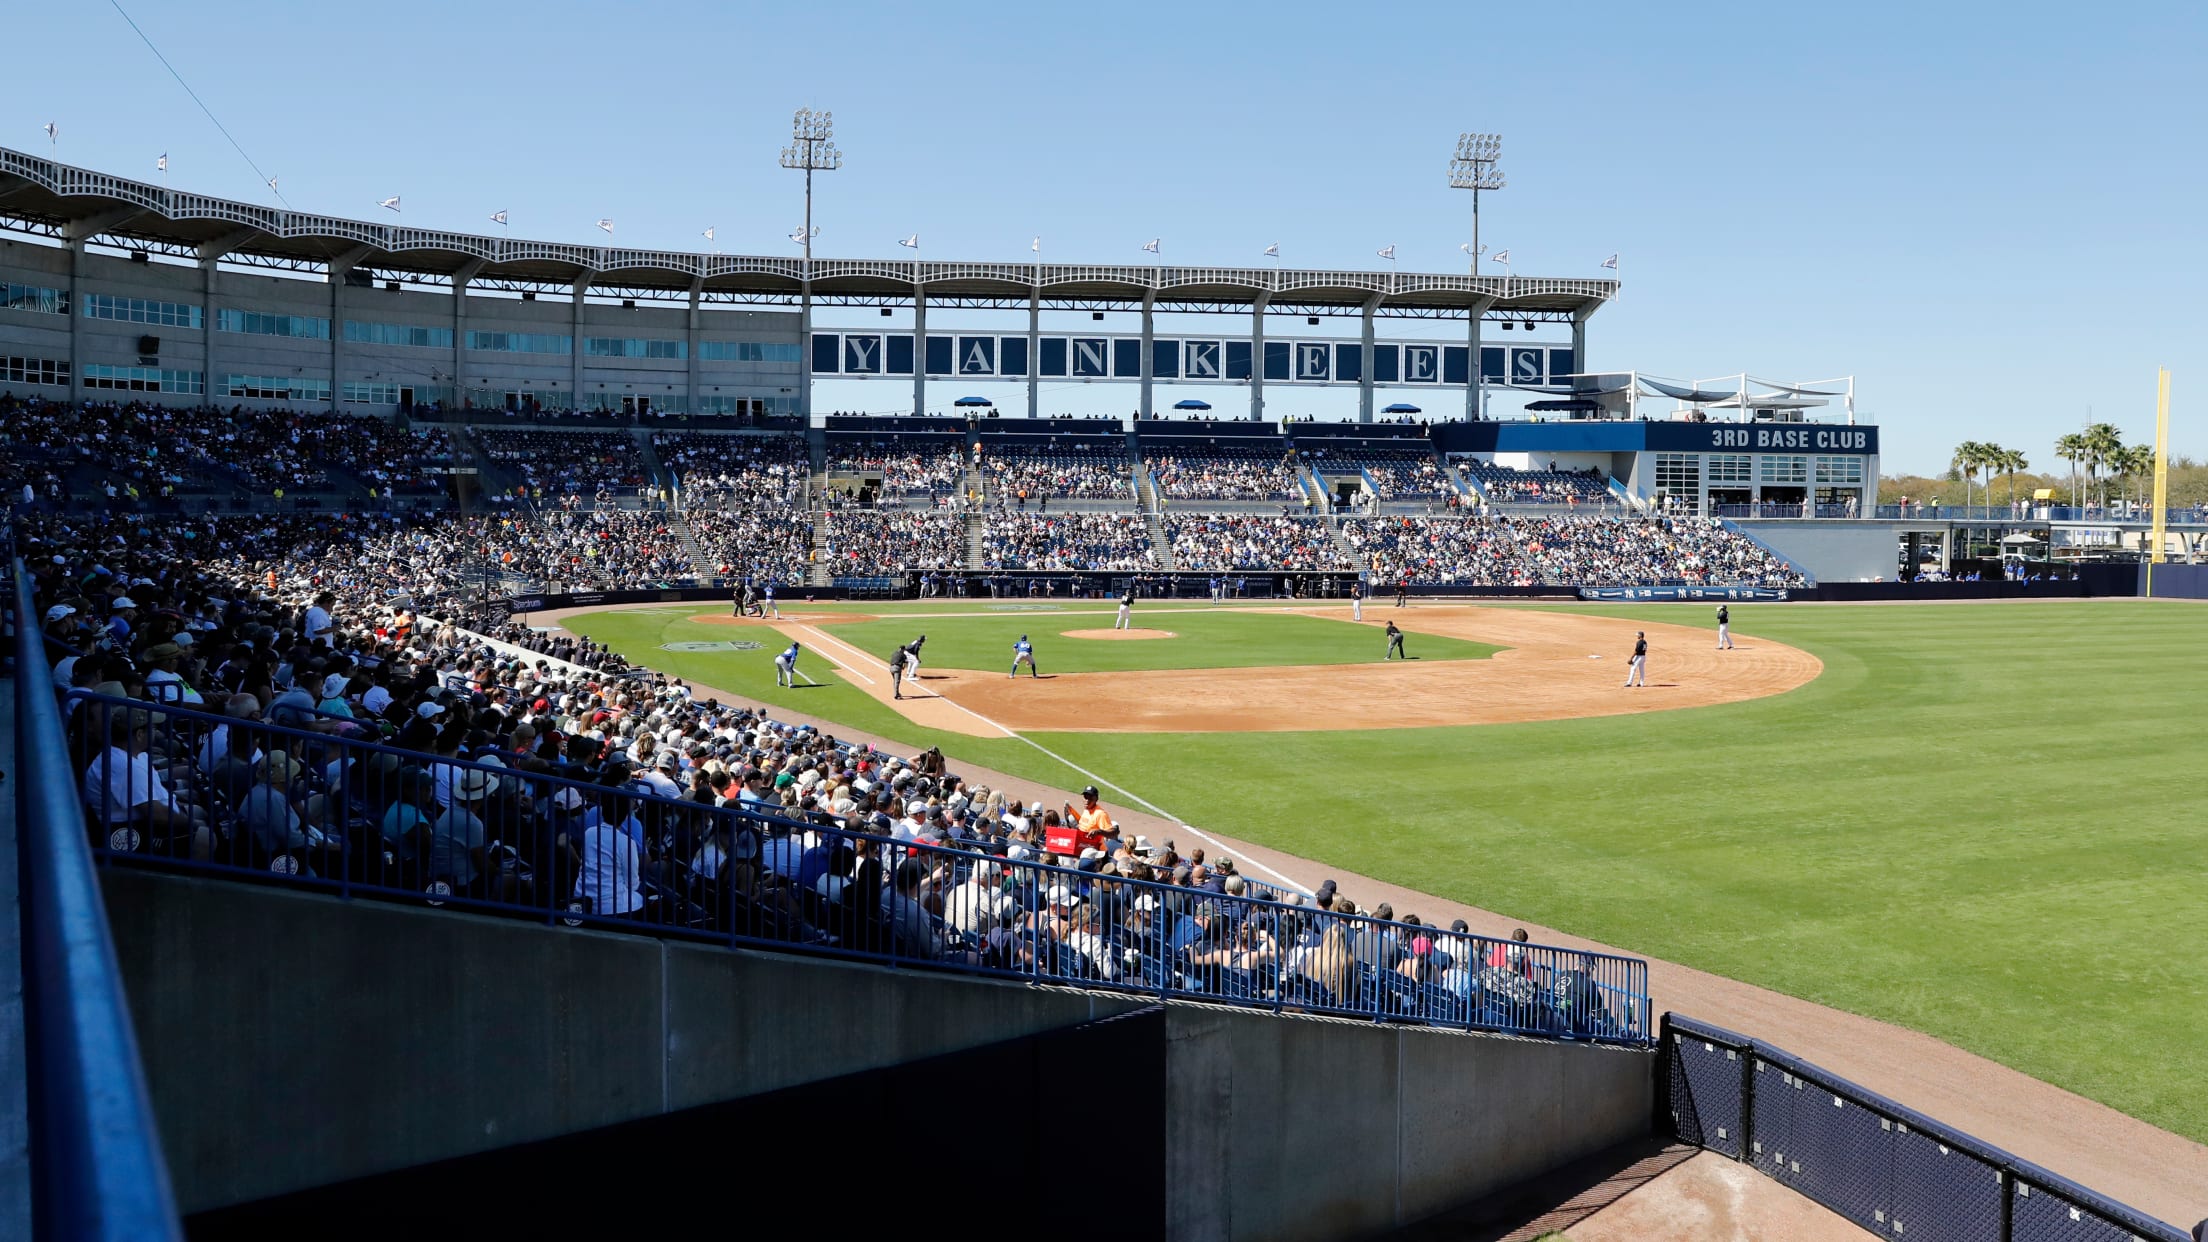 George M. Steinbrenner Field, Spring Training home of the New York Yankees